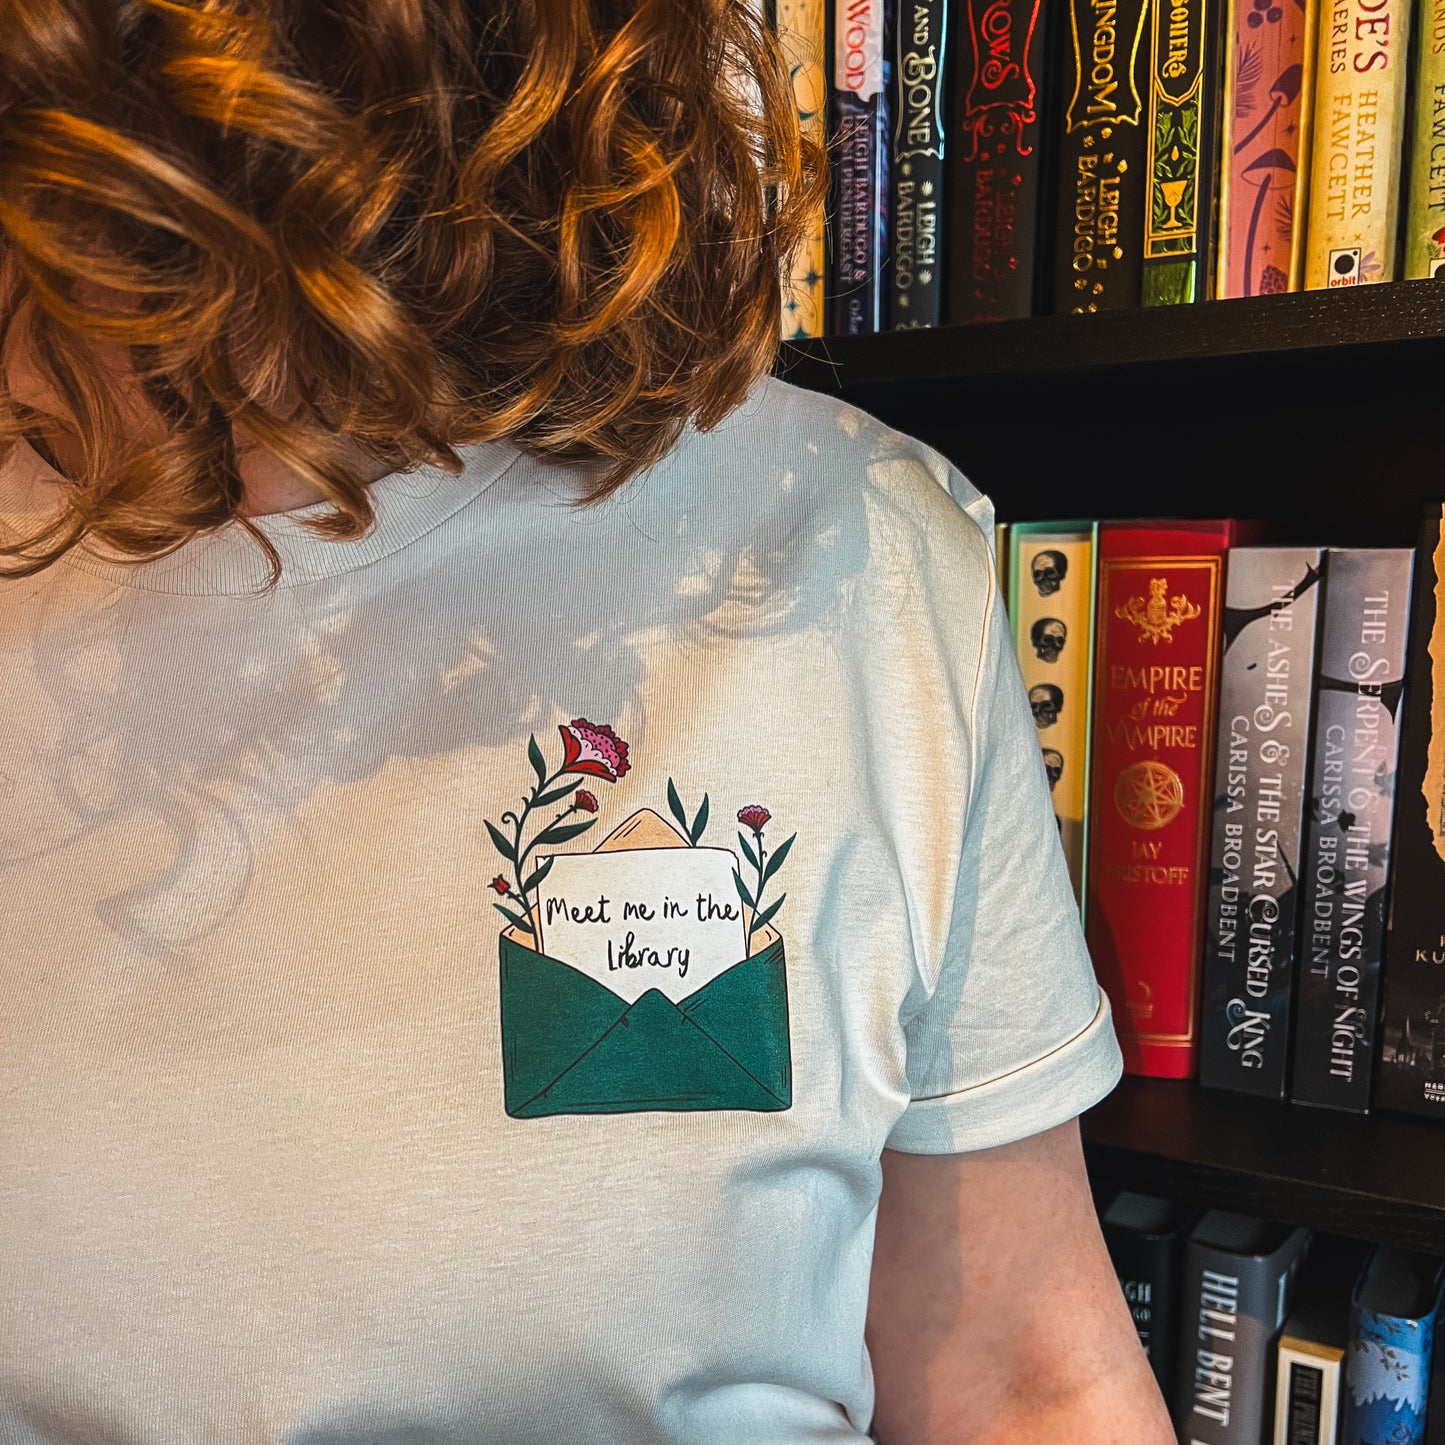 Meet Me in the Library T-Shirt